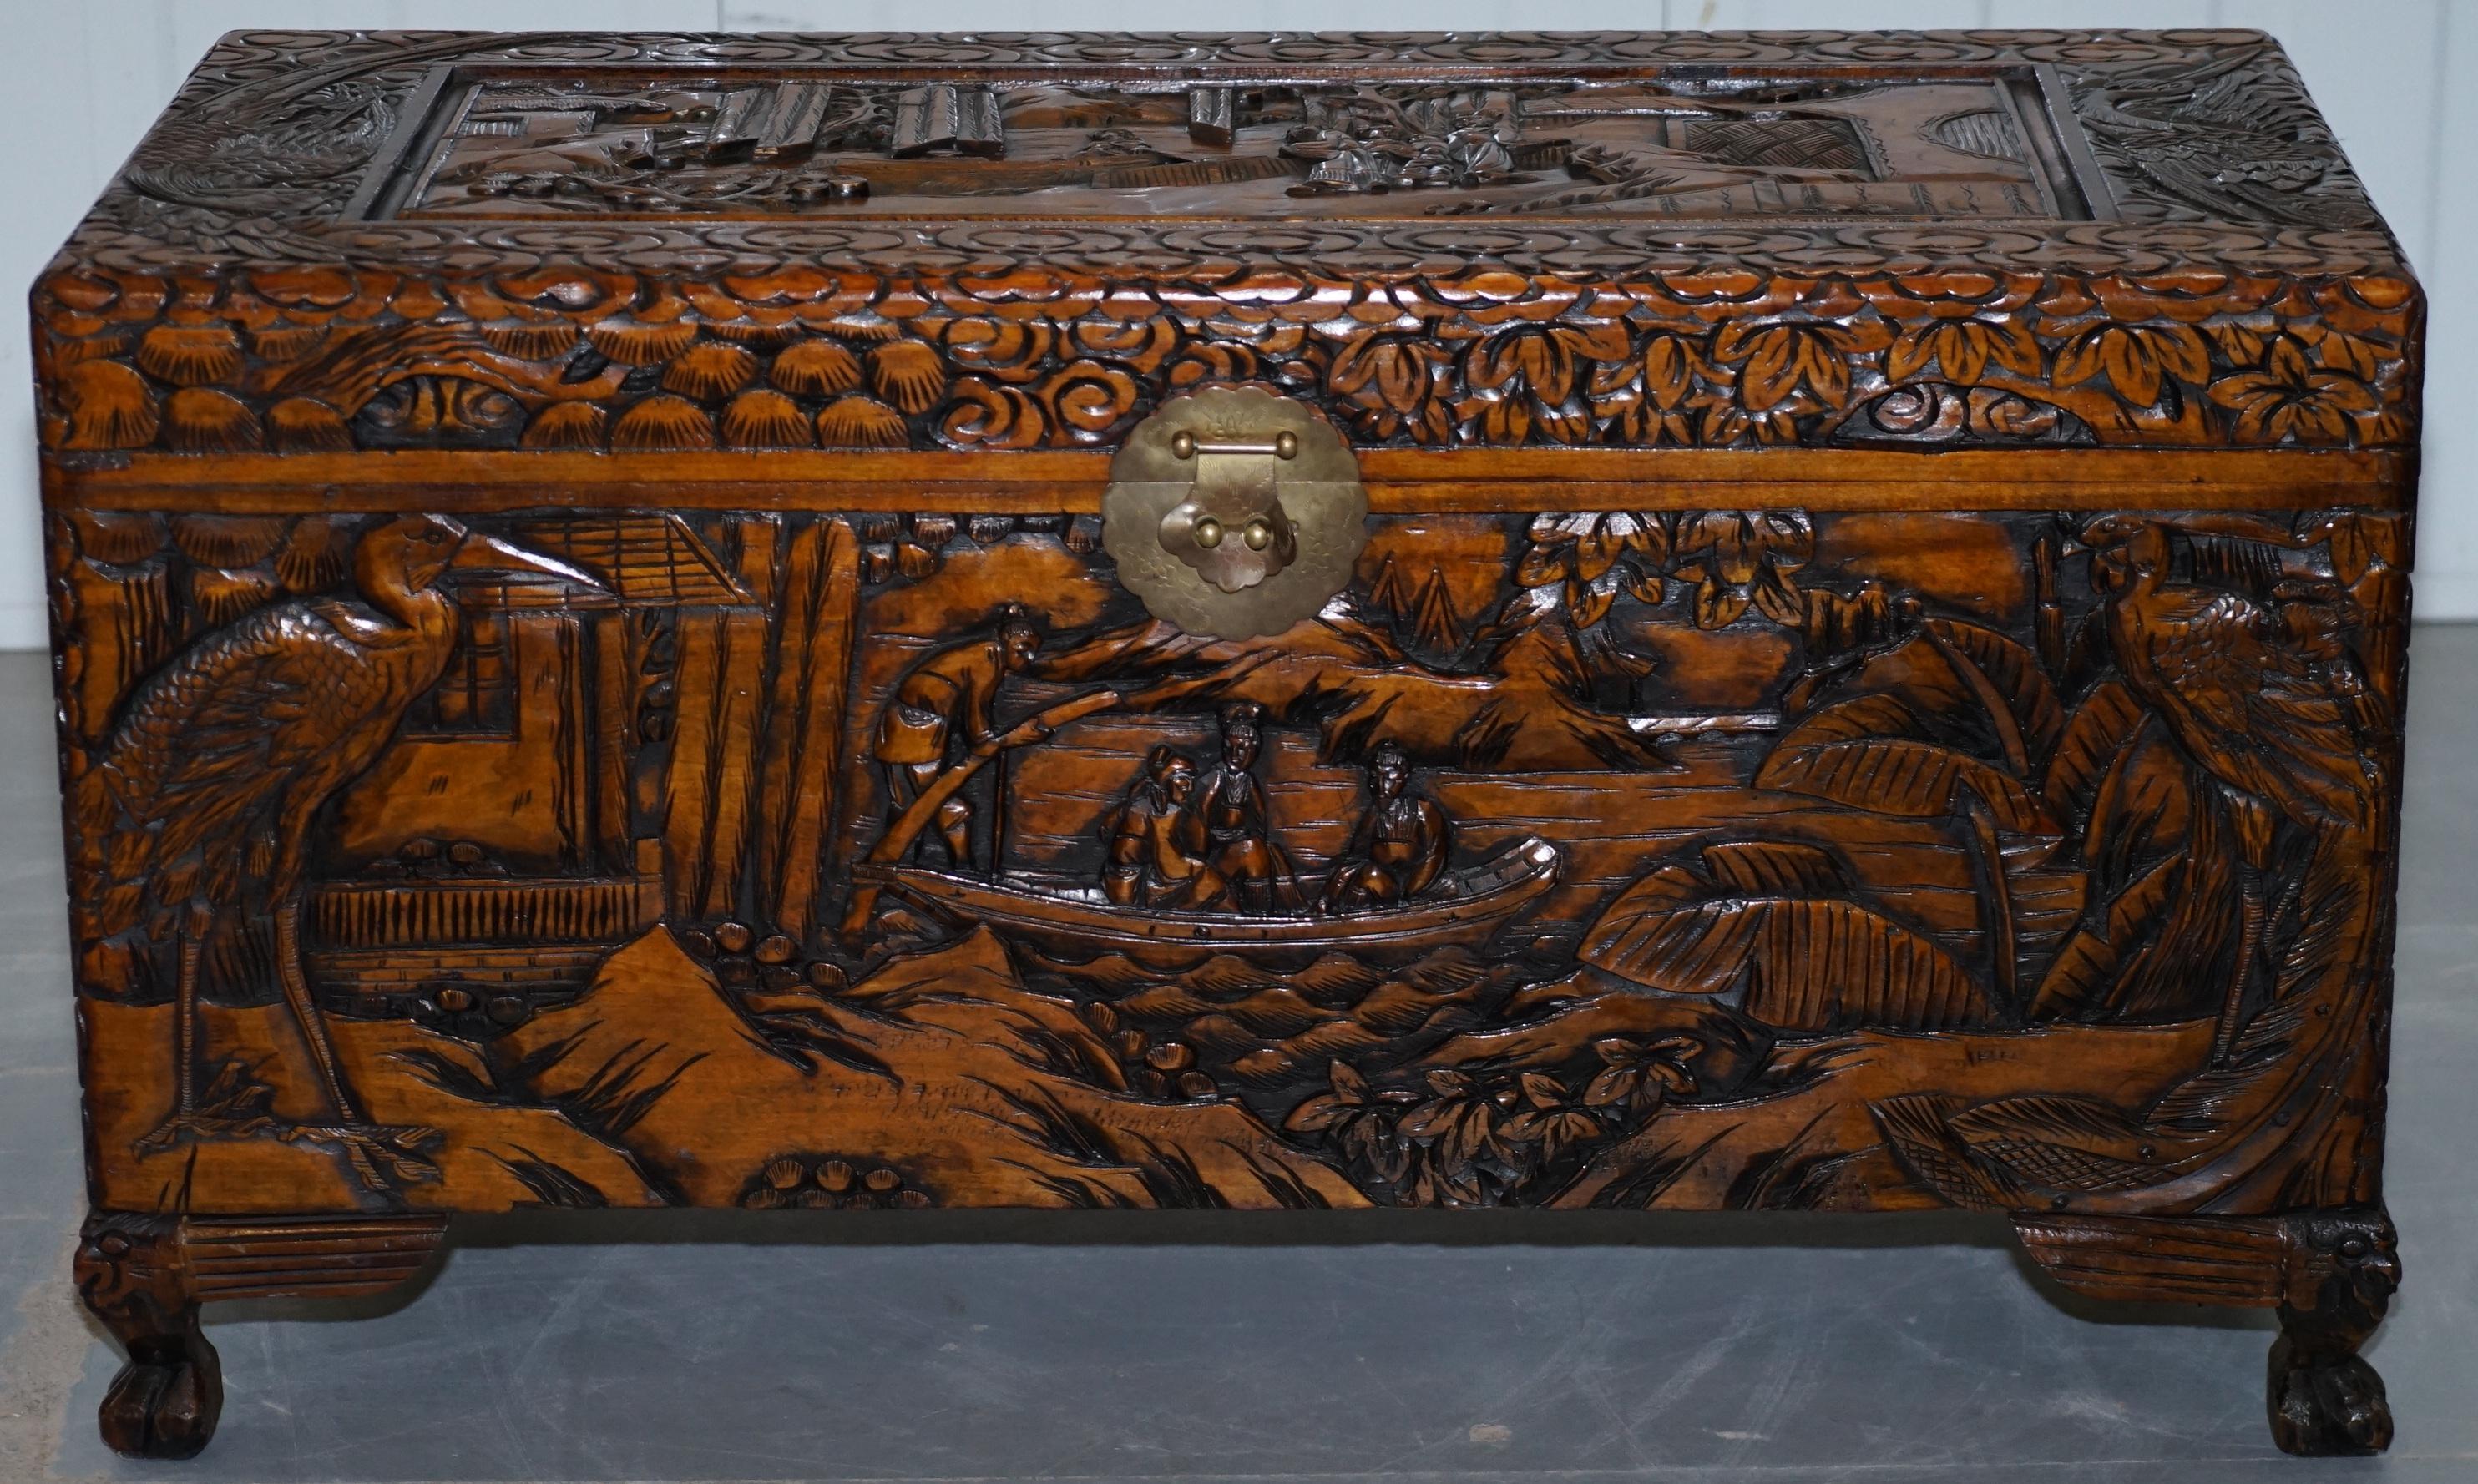 20th Century Chinese Japanese Export Claw & Ball Vintage Chest Trunk Box Cranes Rural Schenes